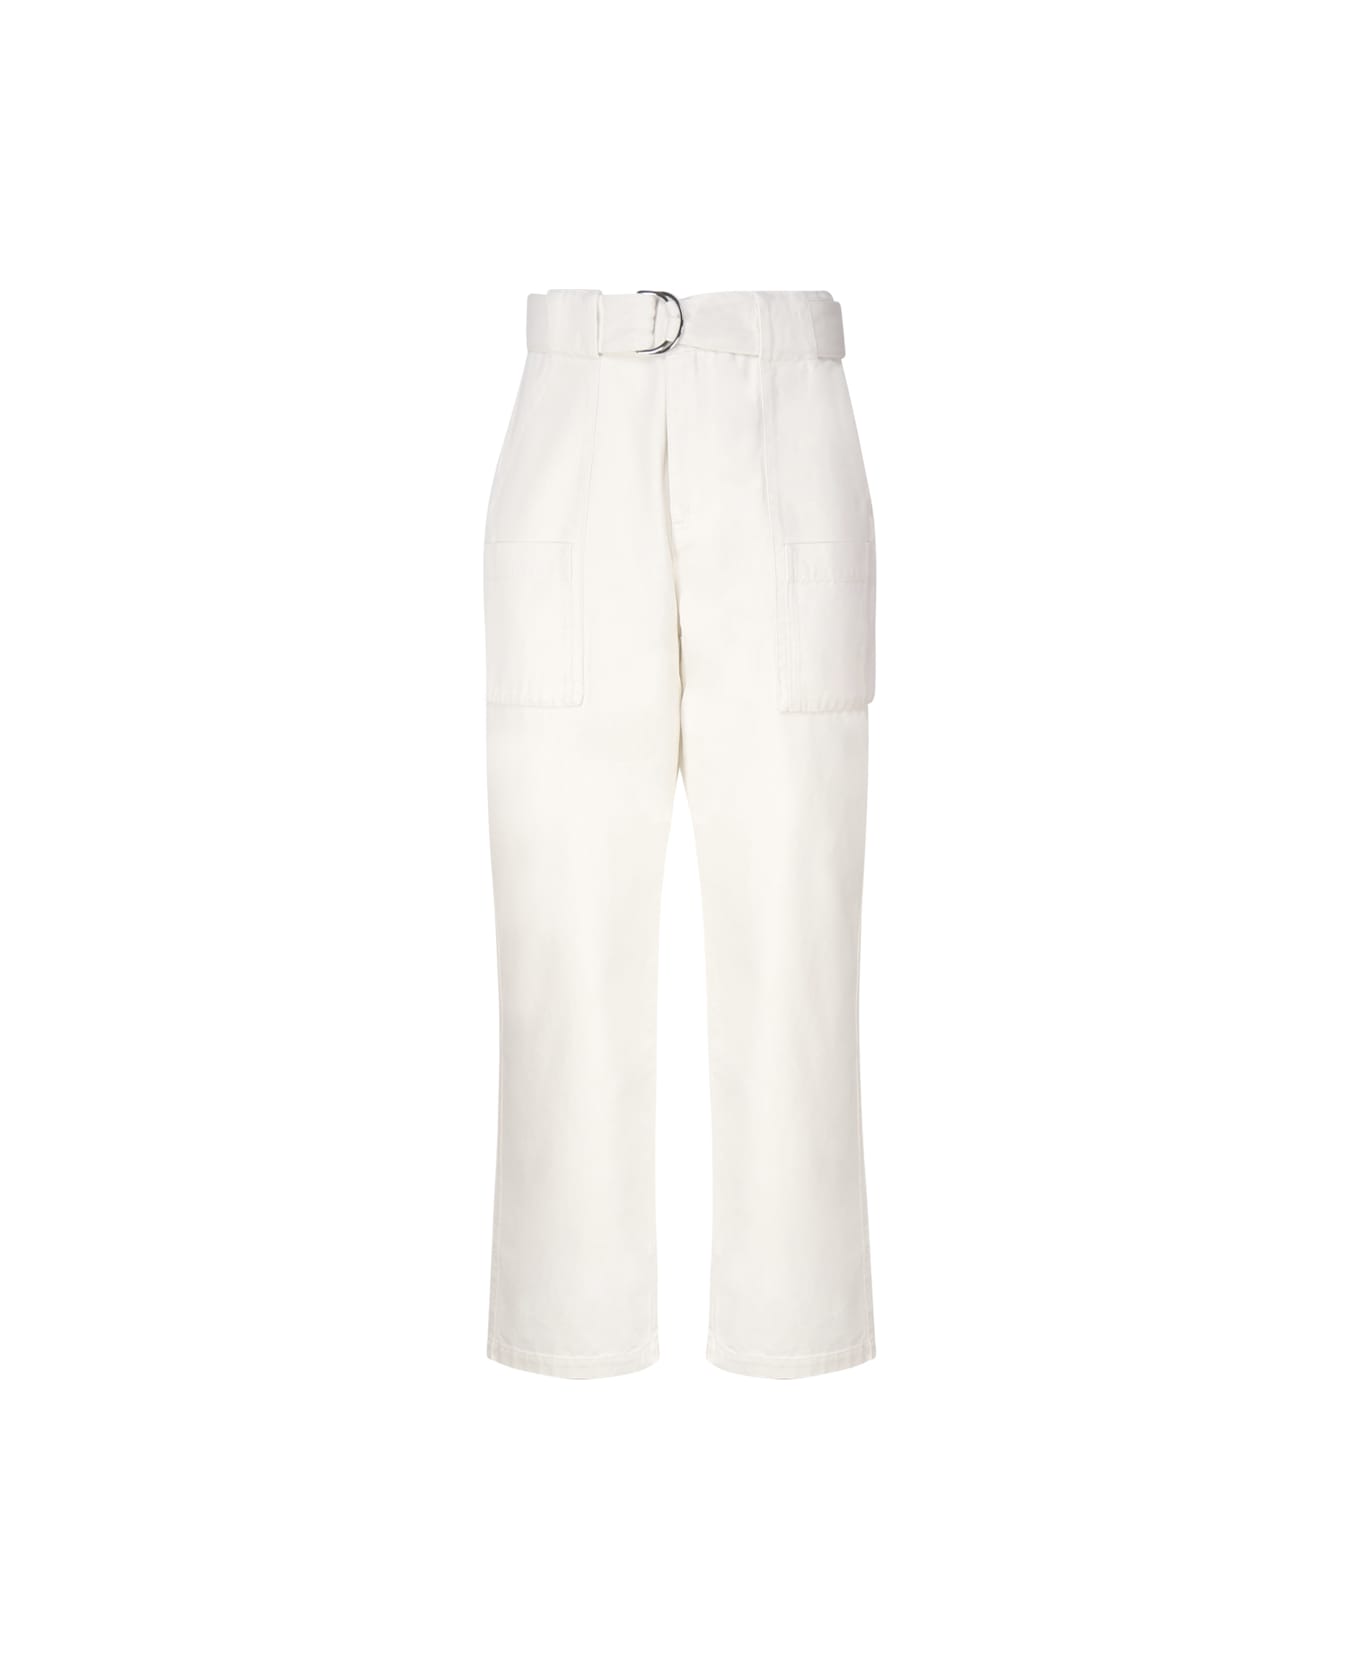 J.W. Anderson Cargo With Belt - White